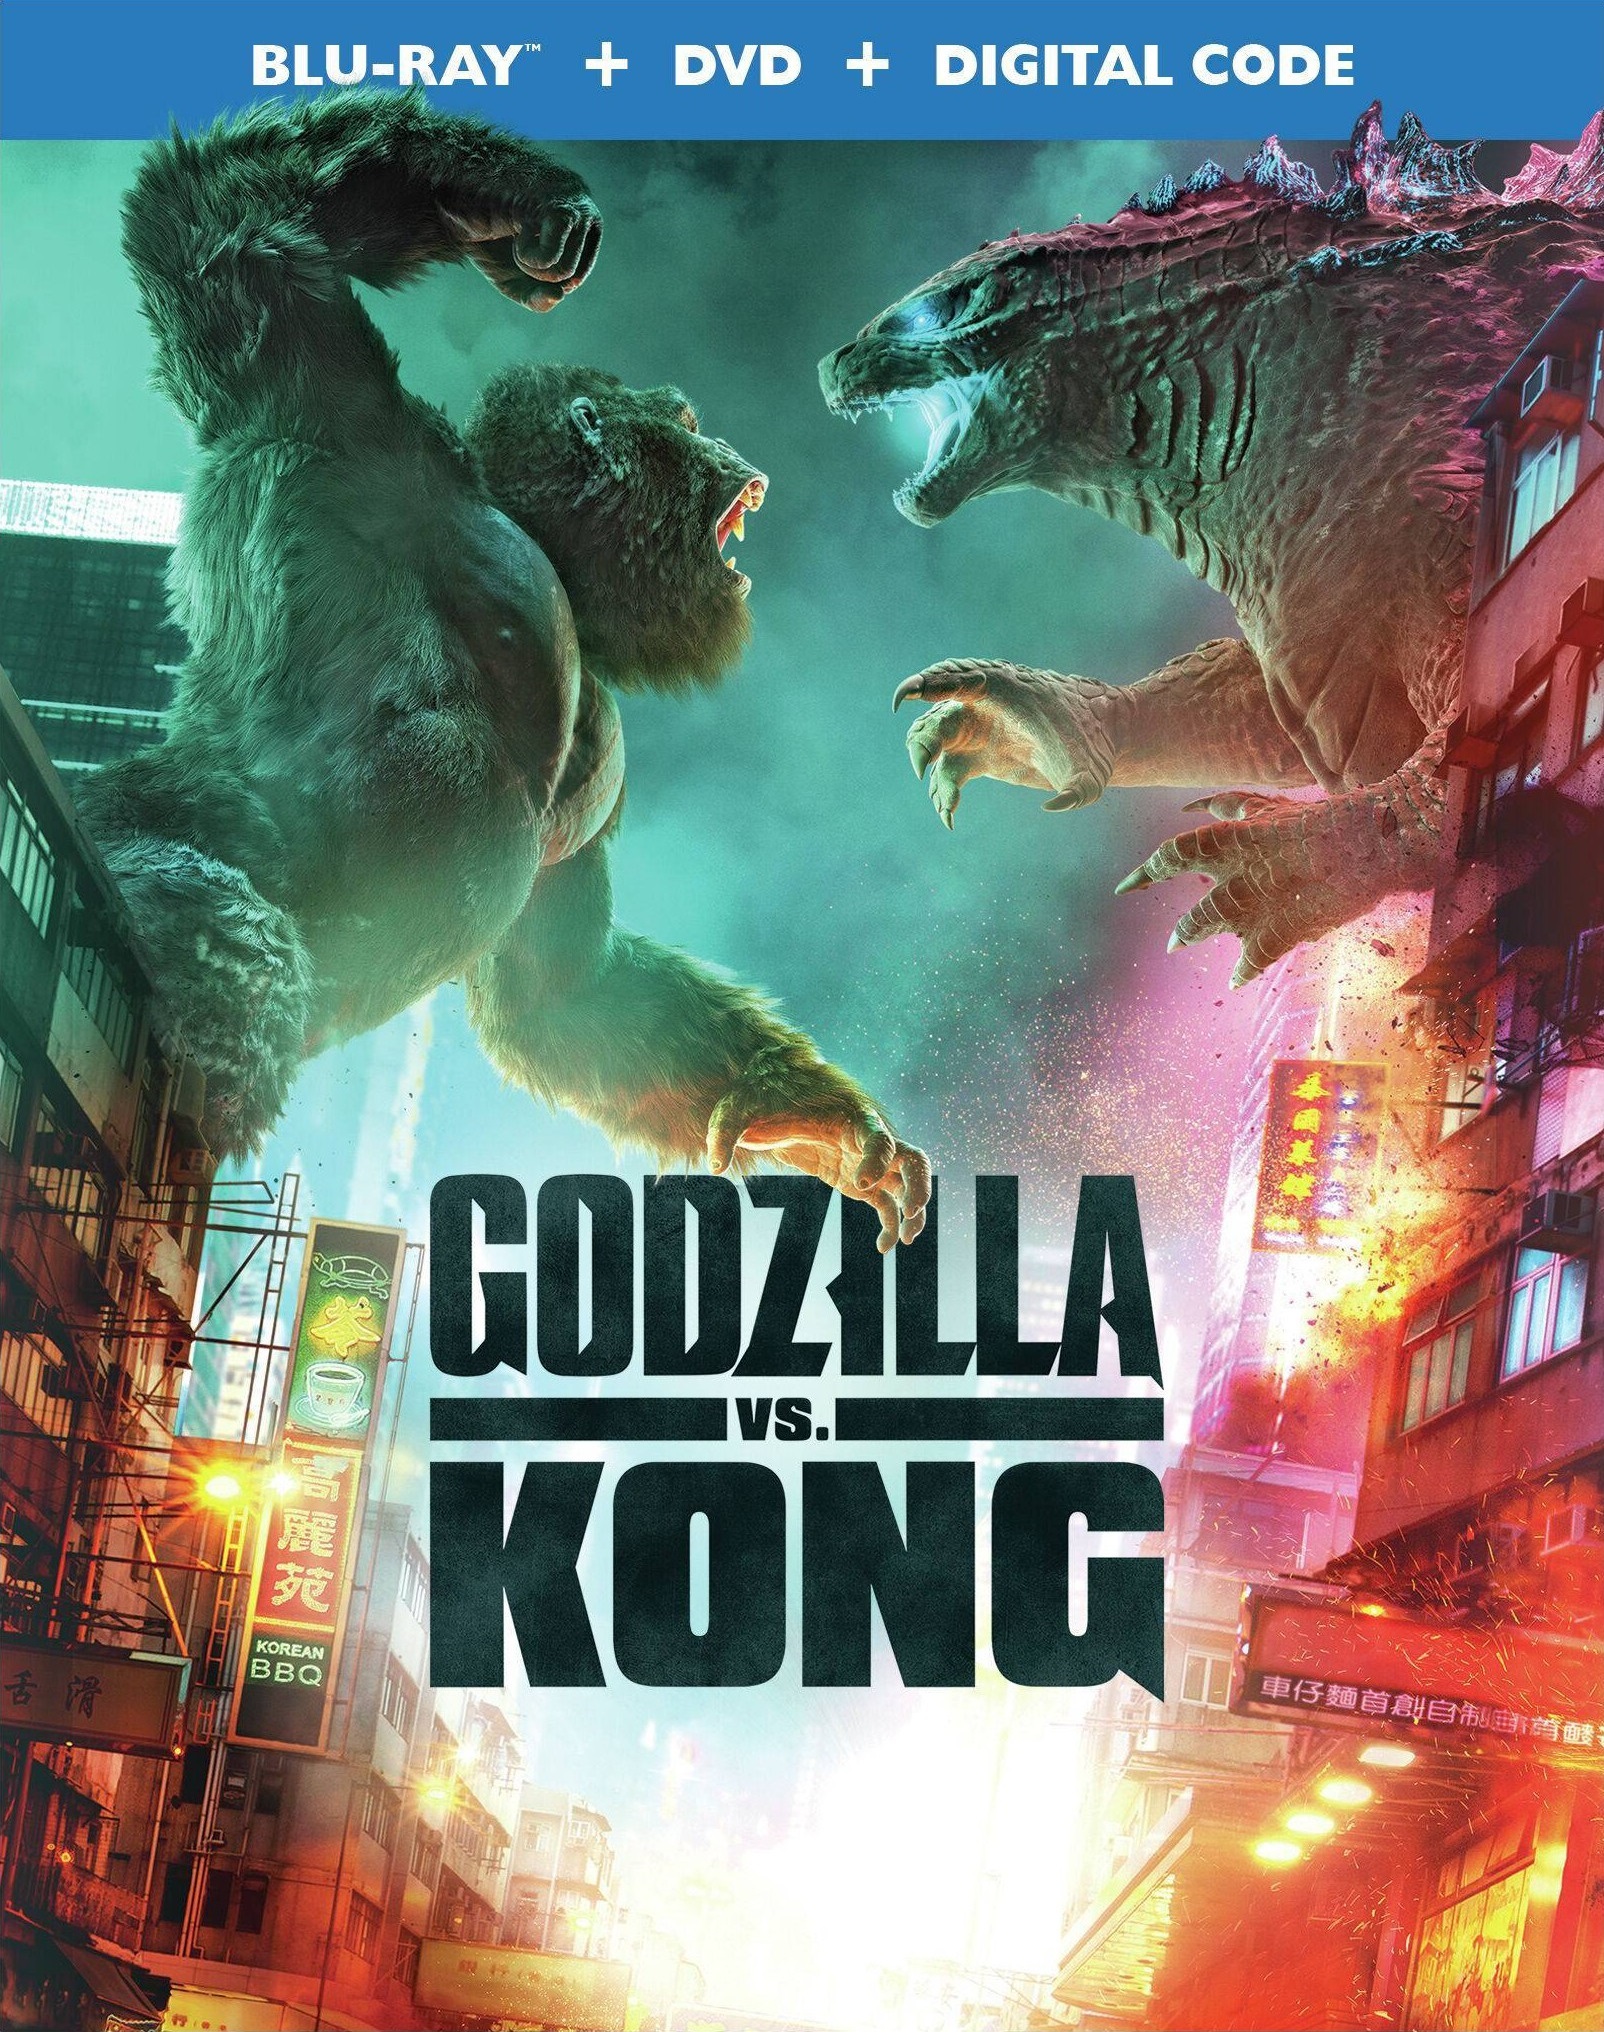 king - Godzilla vs. Kong (2021) Godzilla vs King Kong (2021) [AC3 5.1 + SUP] [Blu Ray]  289698_front